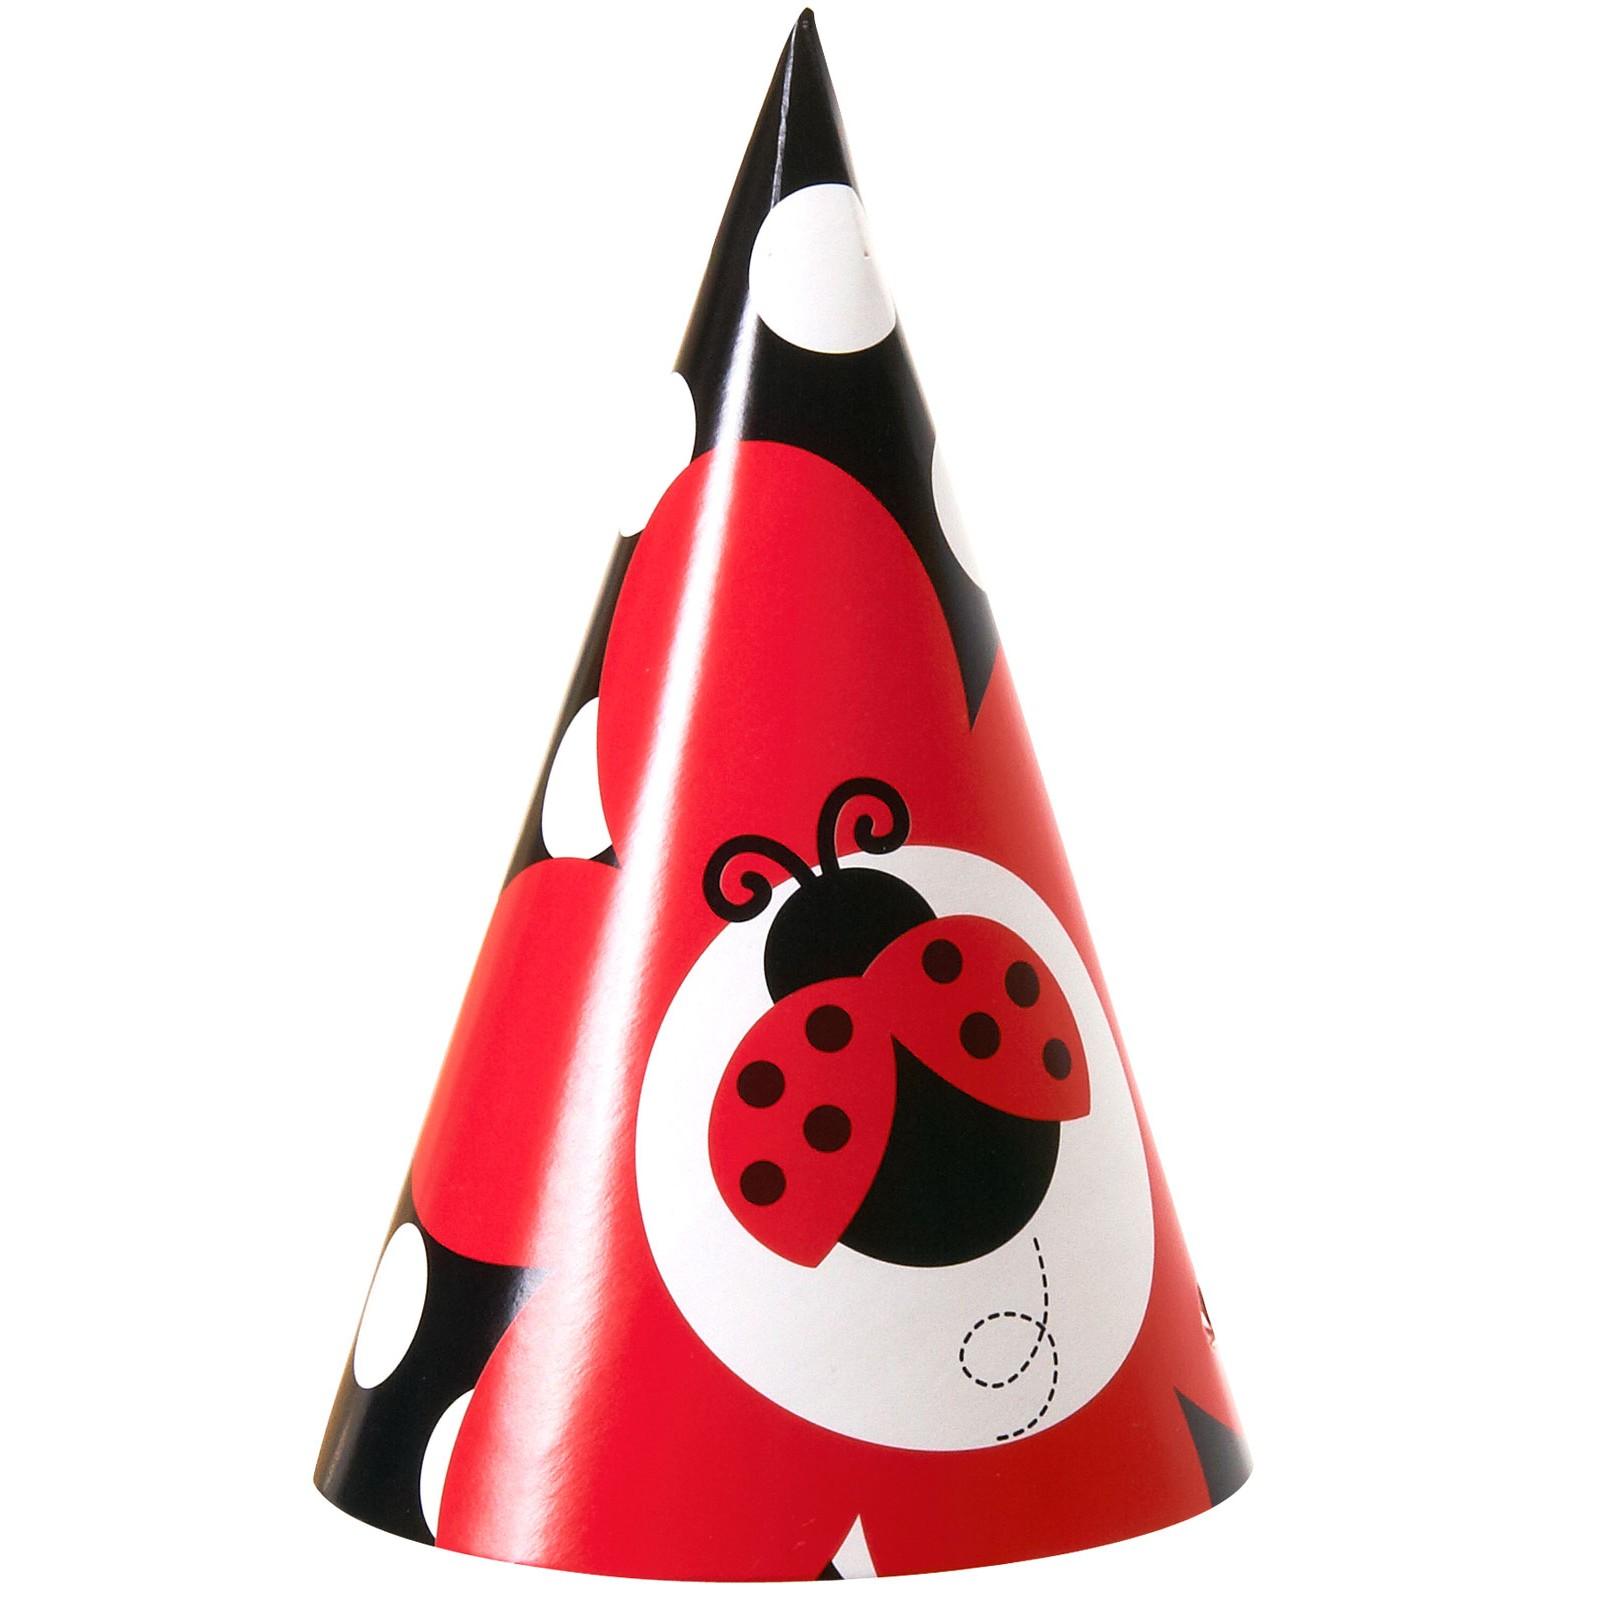 LadyBug Fancy Cone Hats: Ladybug First Birthday Party Decorations for Your Little Lady!